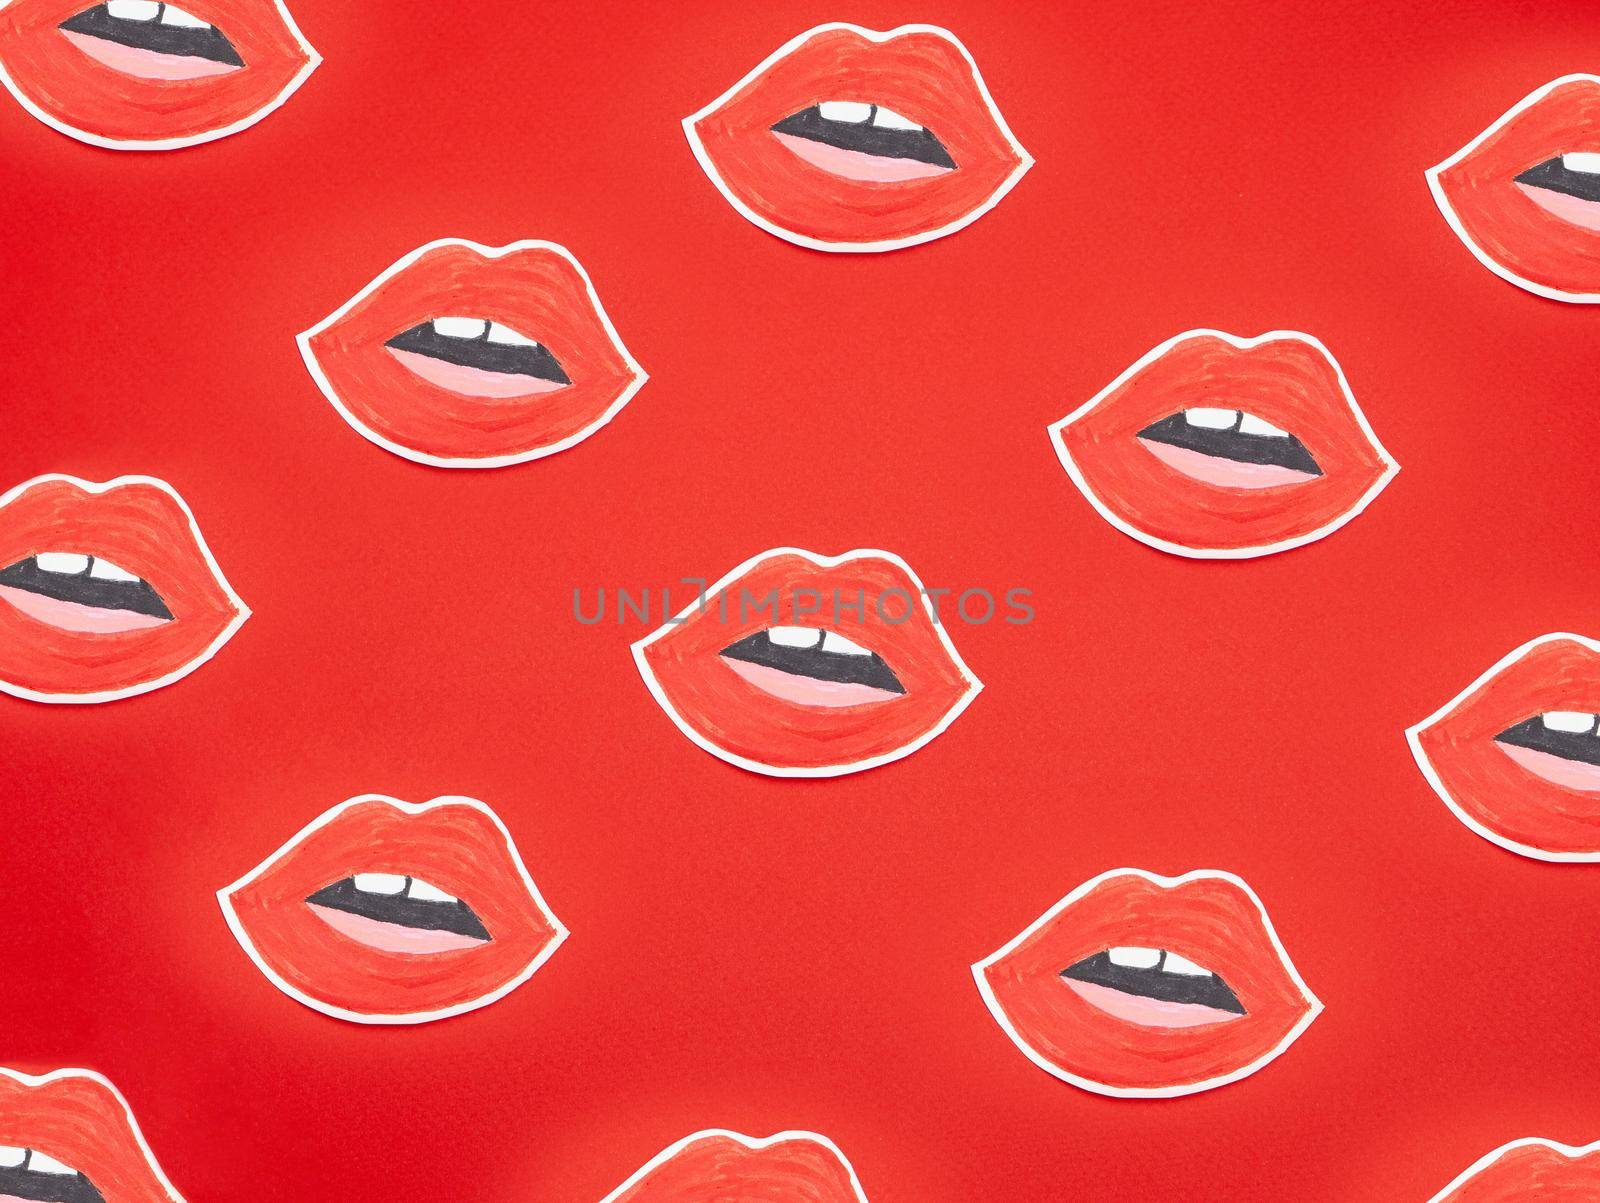 Set of lips shaped stickers on red background by Julenochek